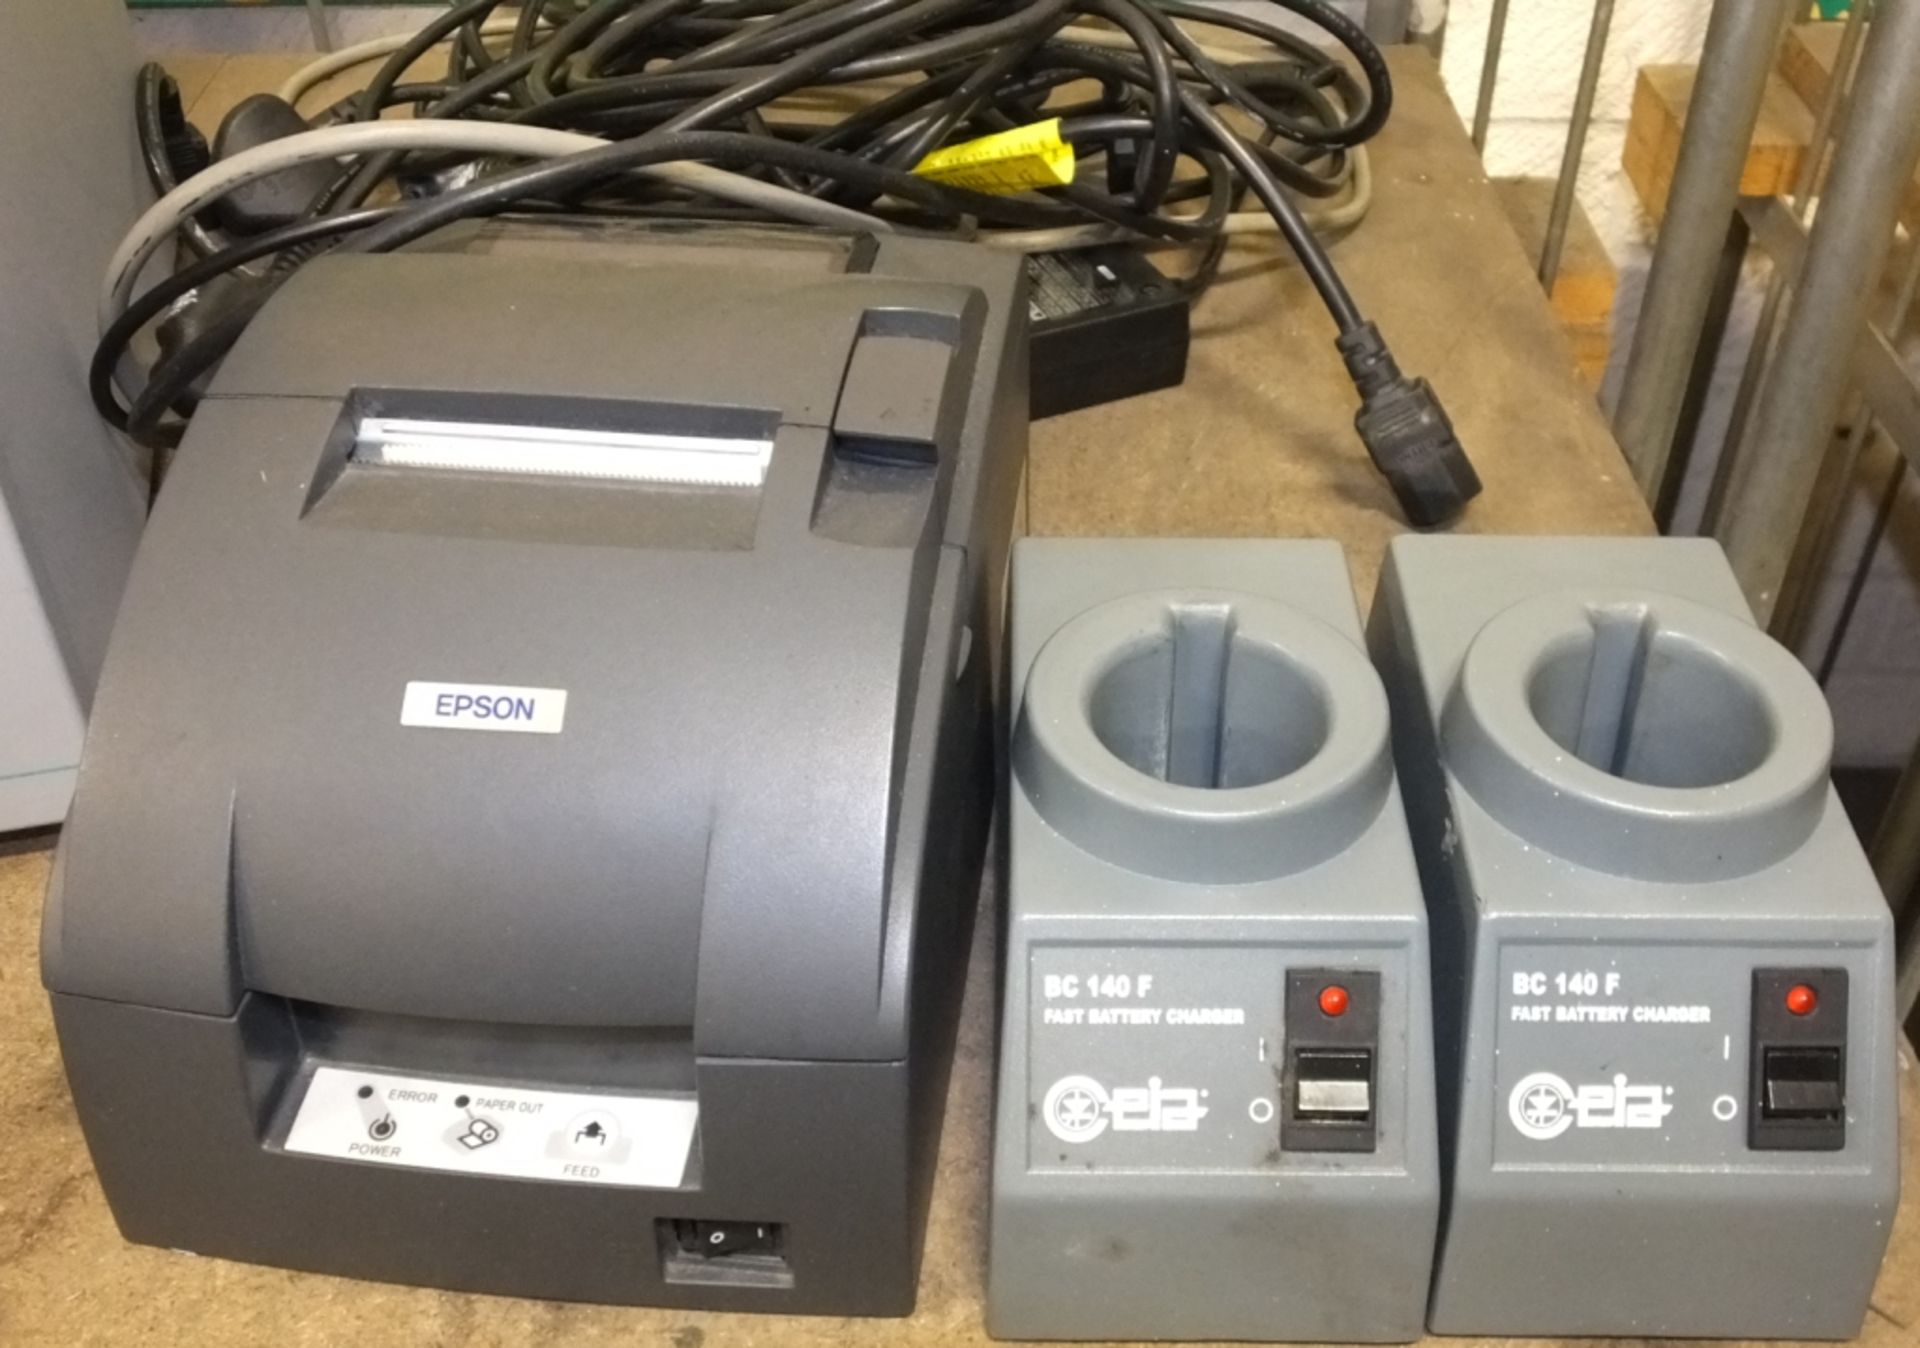 Smiths IONSCAN Detection system, Epson printer, 2x Fast Battery chargers BC 140F - Image 3 of 8